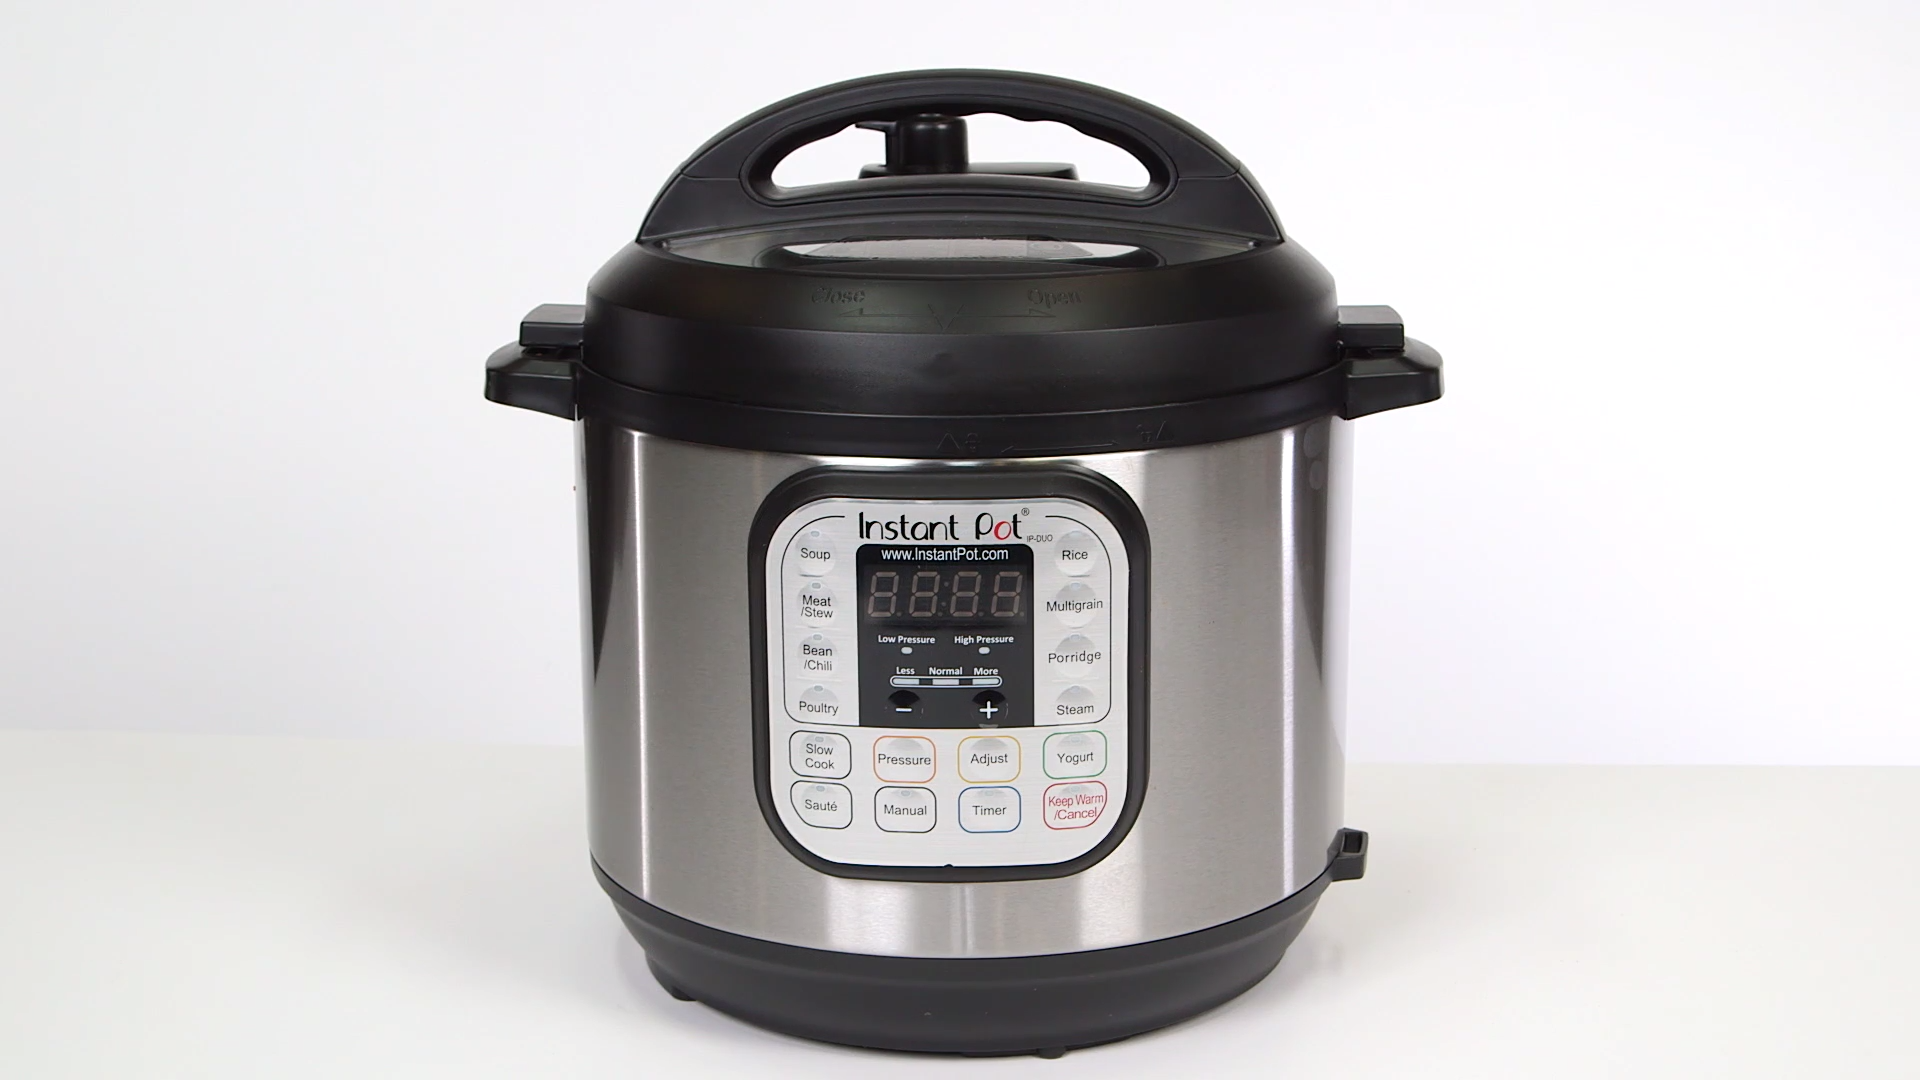 5 Things You Should Not Do with Your Instant Pot